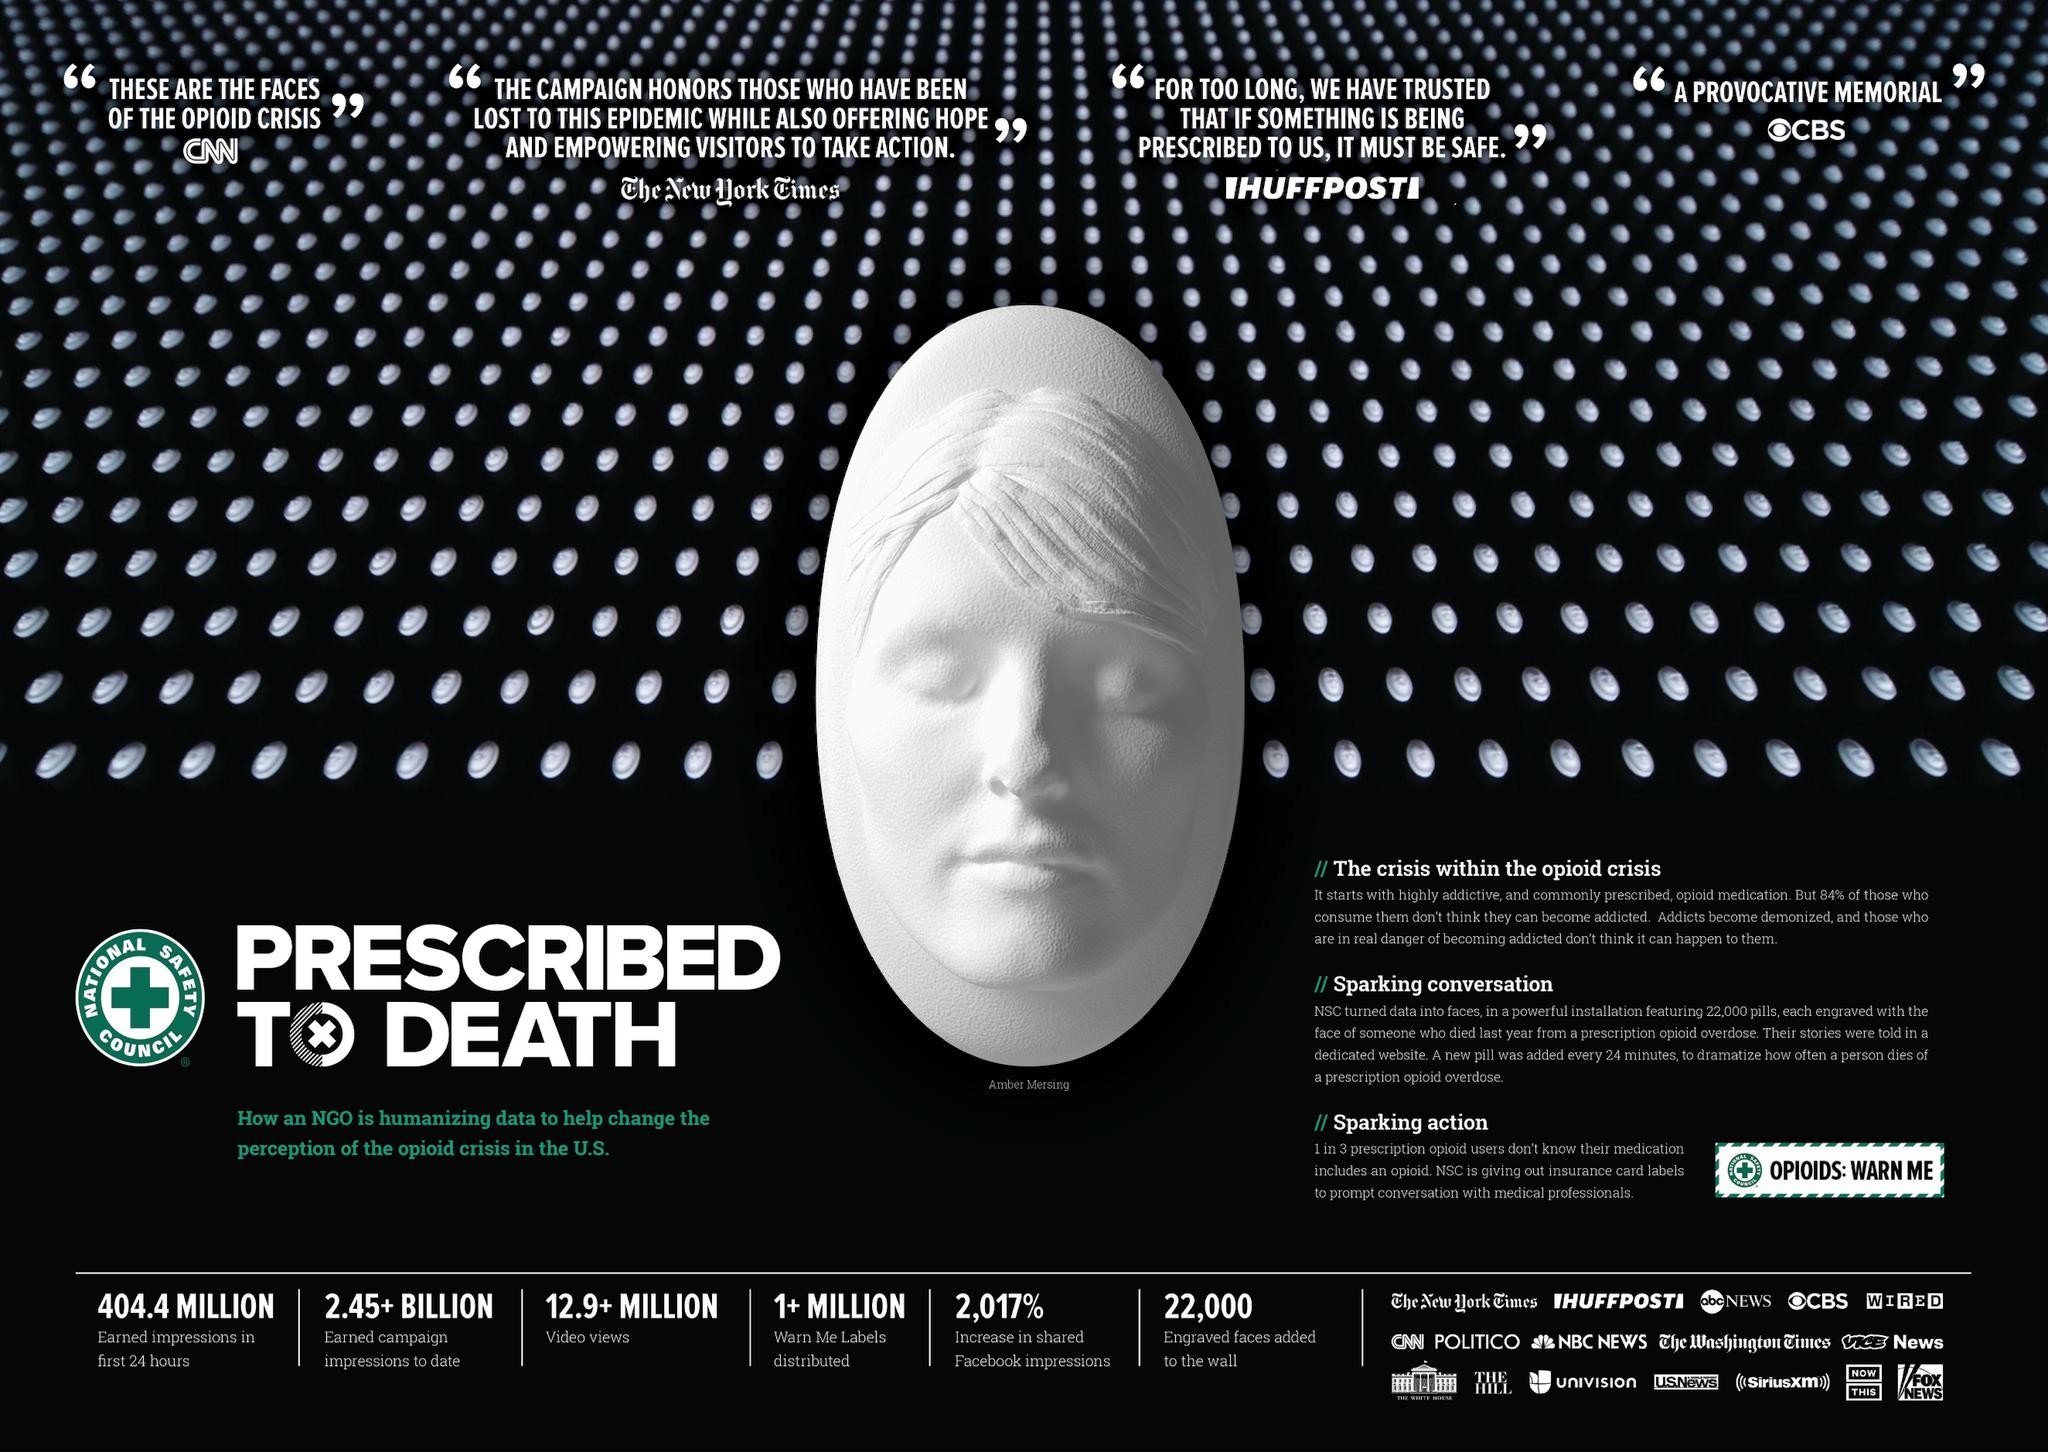 NATIONAL SAFETY COUNCIL "PRESCRIBED TO DEATH"